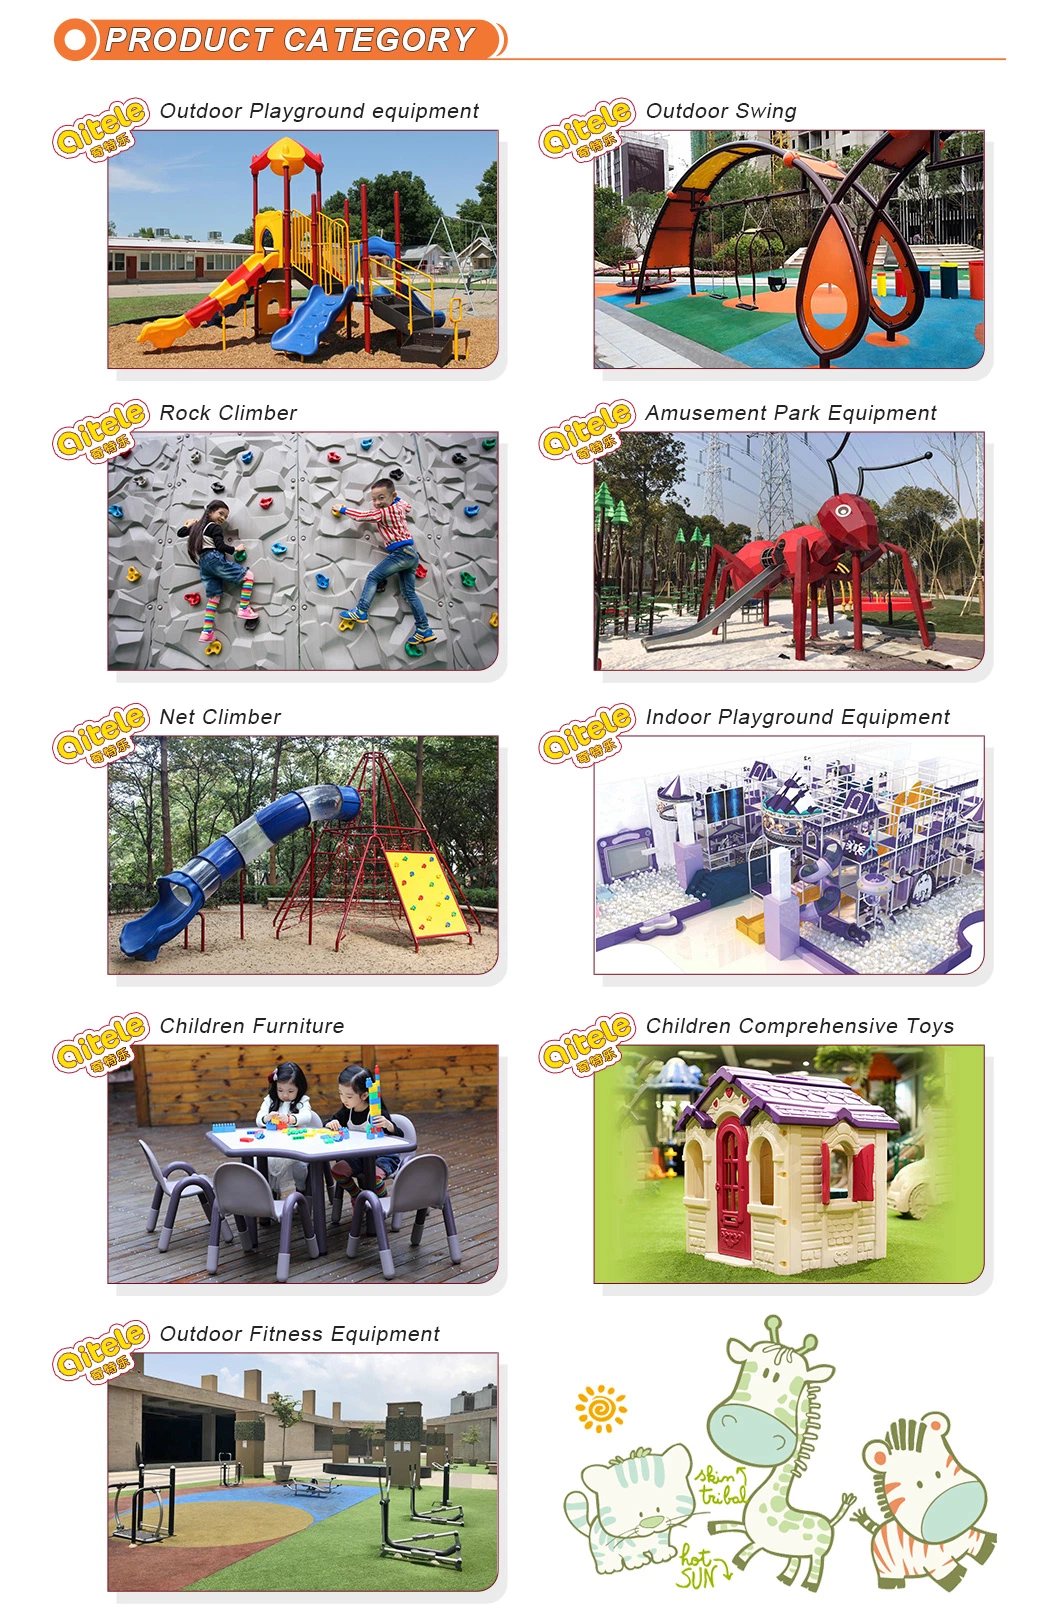 Small High Quality Slides Kids Swingset Outdoor Playground Equipment